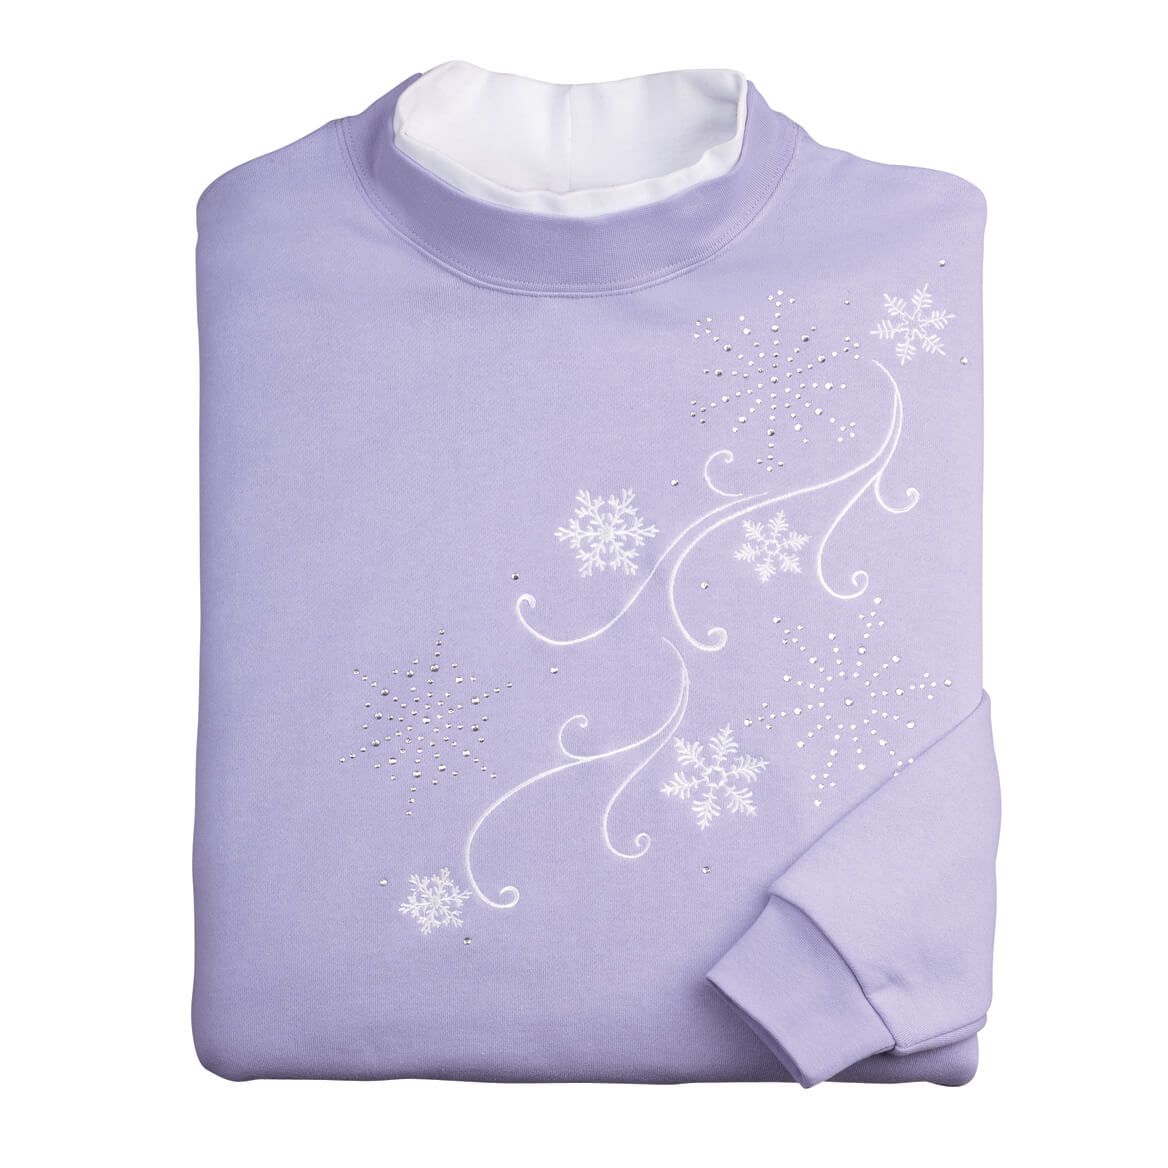 Embroidered Cascading Snowflakes Sweatshirt by Sawyer Creek + '-' + 359981